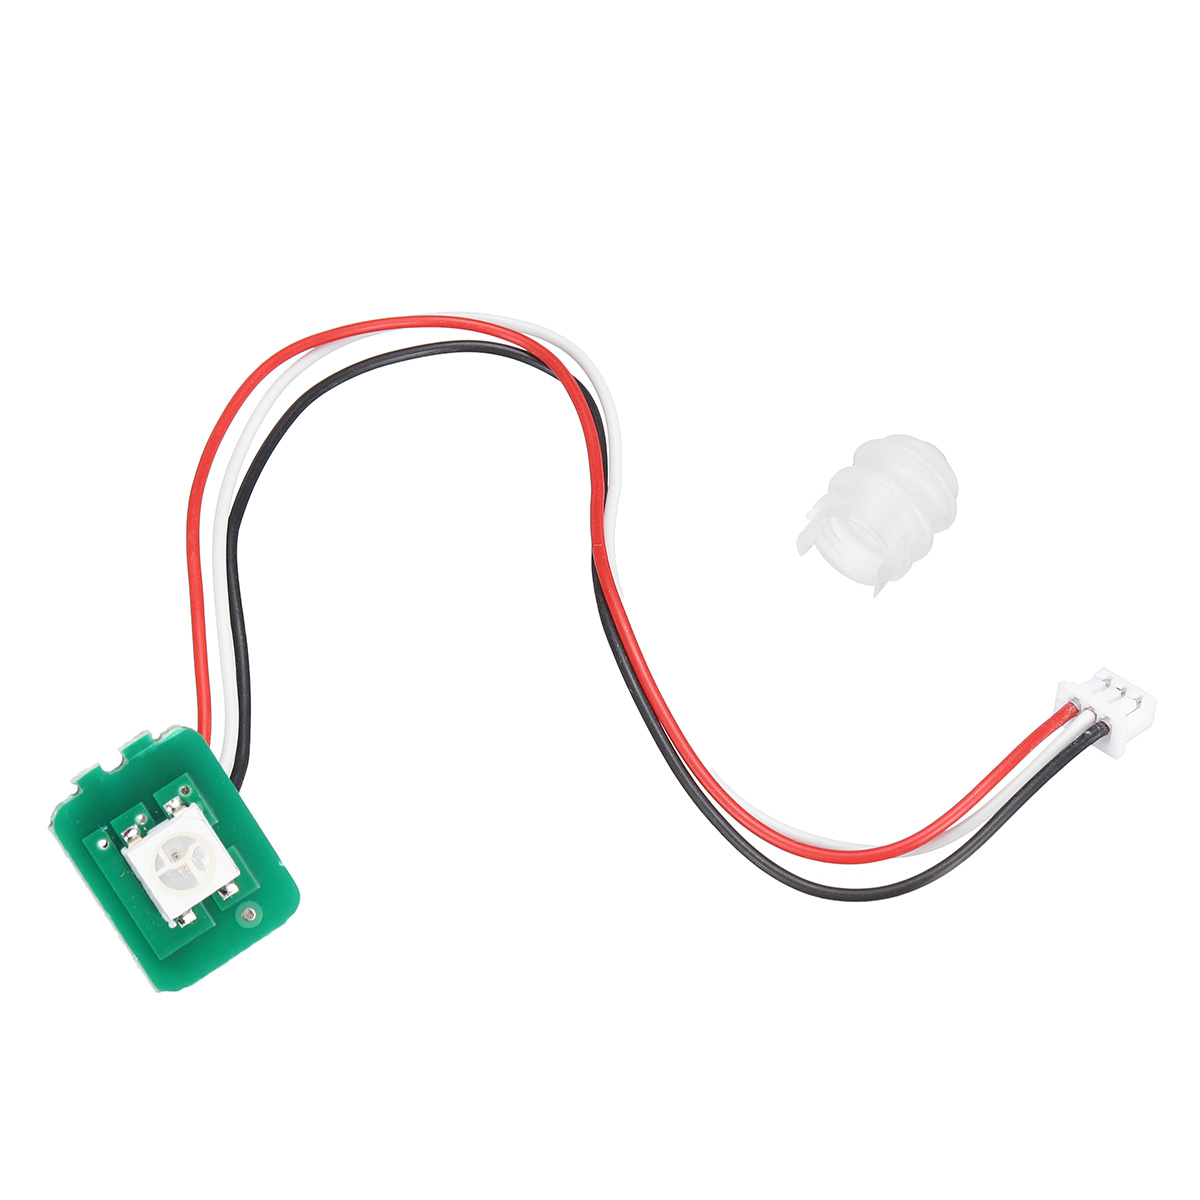 Eachine E200 Status light RC Helicopter Parts